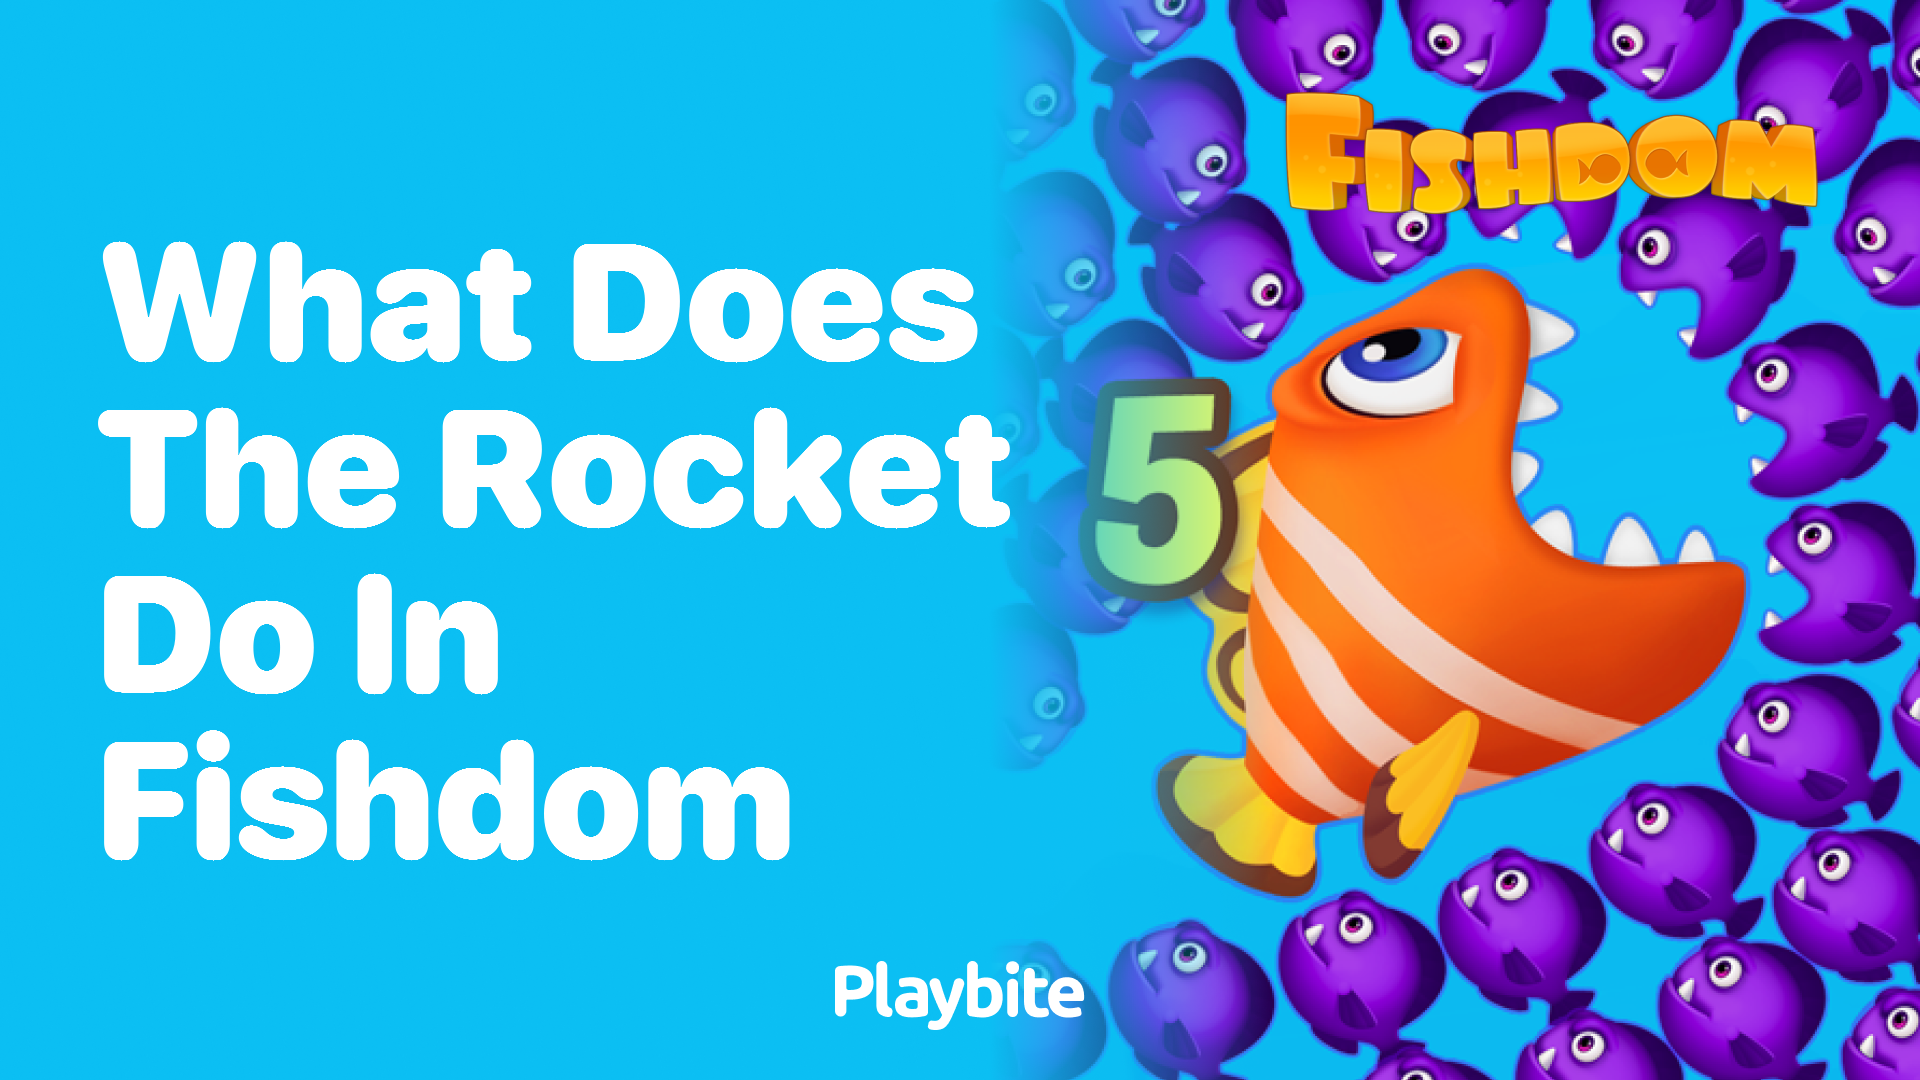 What Does the Rocket Do in Fishdom?